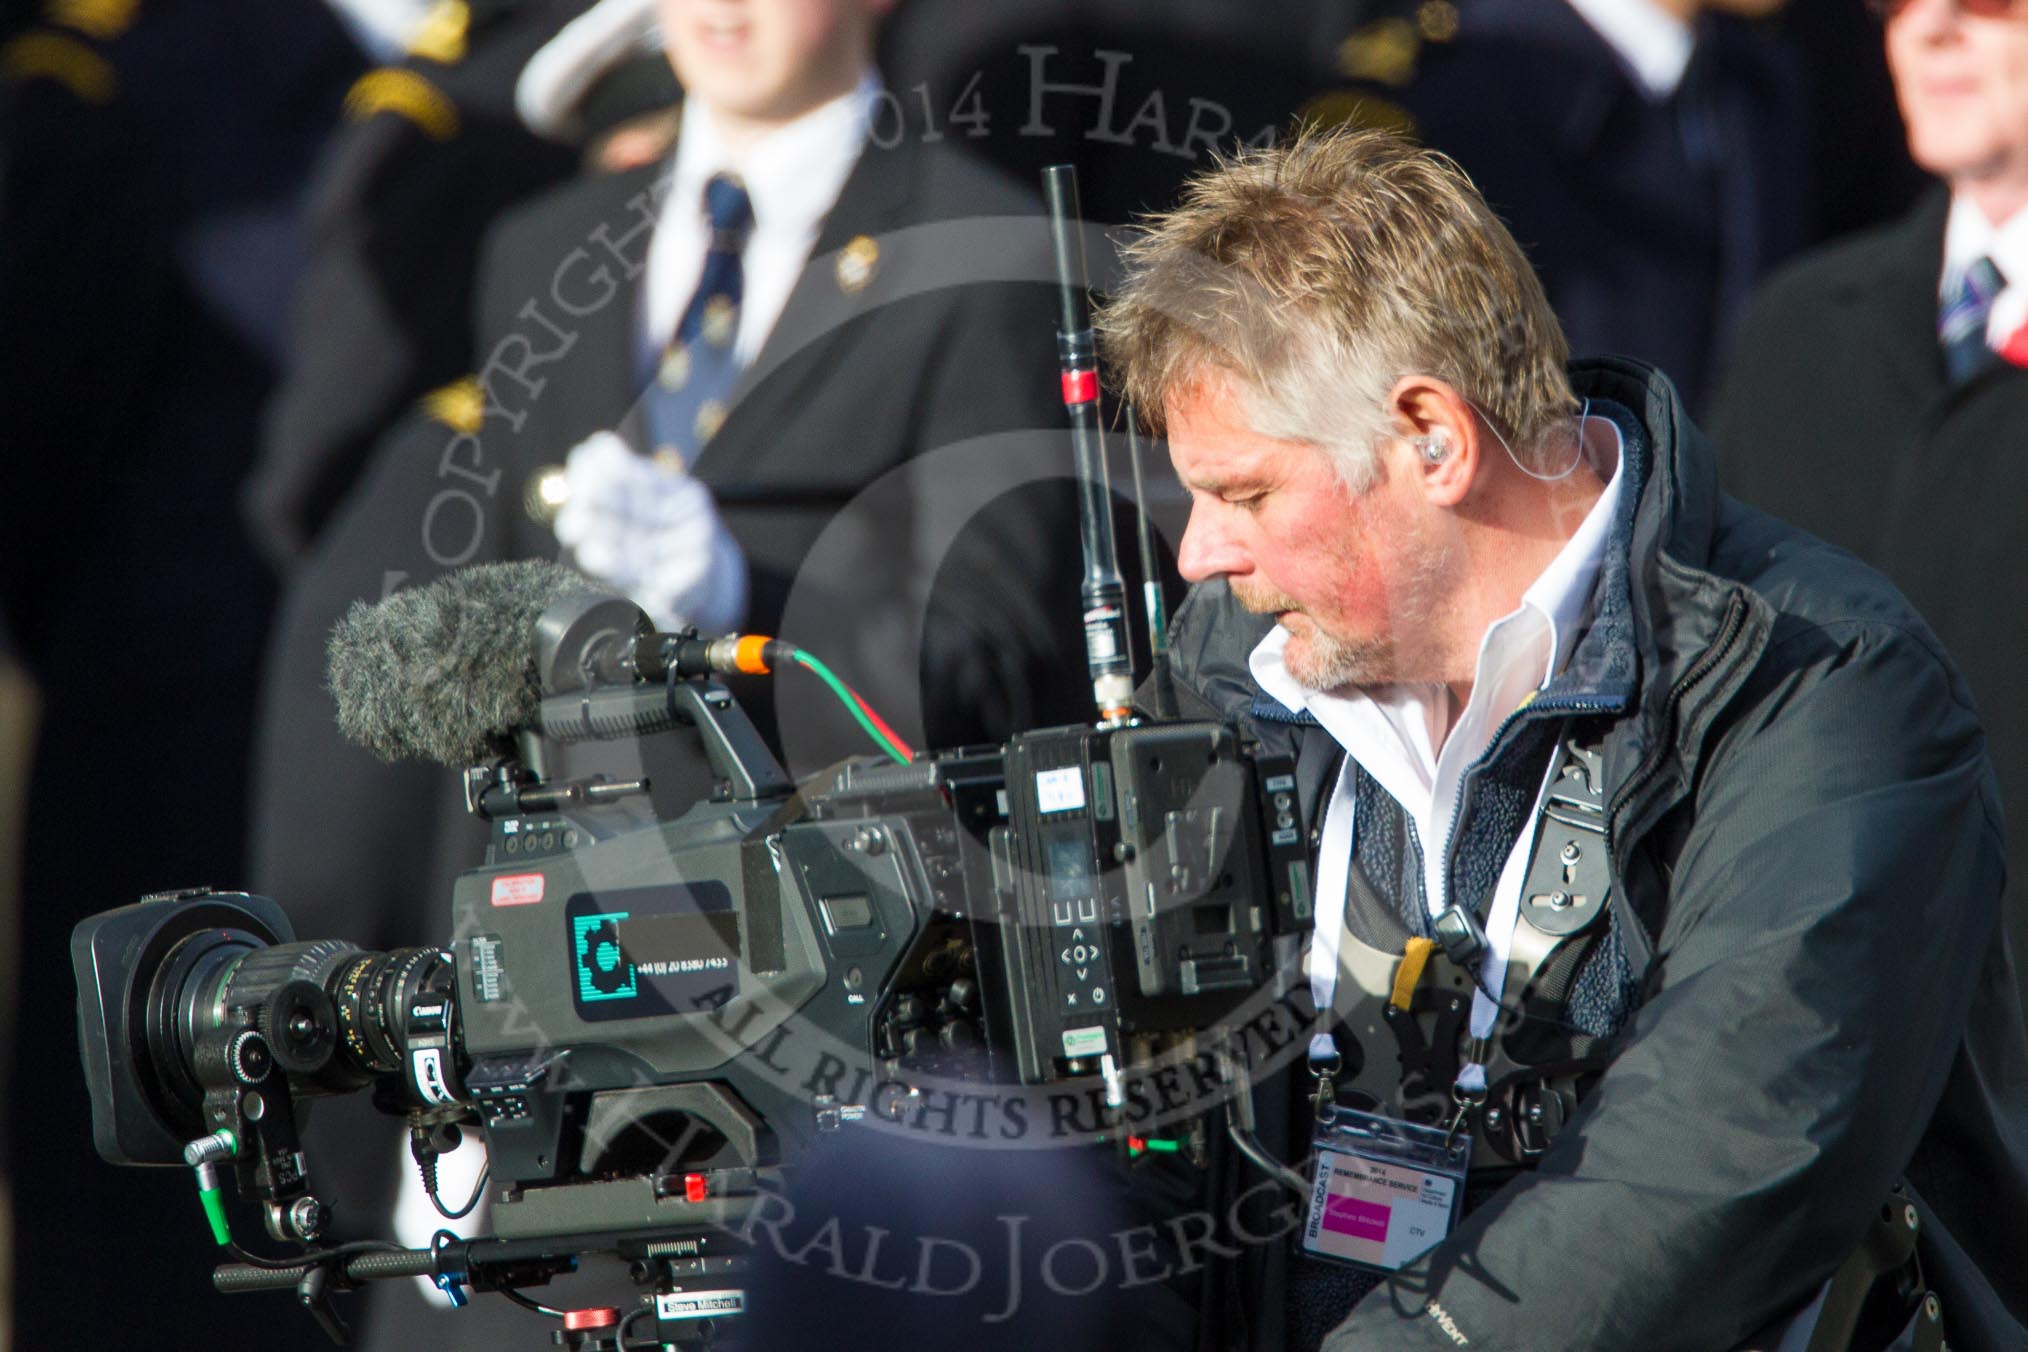 Remembrance Sunday at the Cenotaph in London 2014: The stedycam operator for the VVC live broadcast with group C1, the R.A.F. Association.
Press stand opposite the Foreign Office building, Whitehall, London SW1,
London,
Greater London,
United Kingdom,
on 09 November 2014 at 11:37, image #21